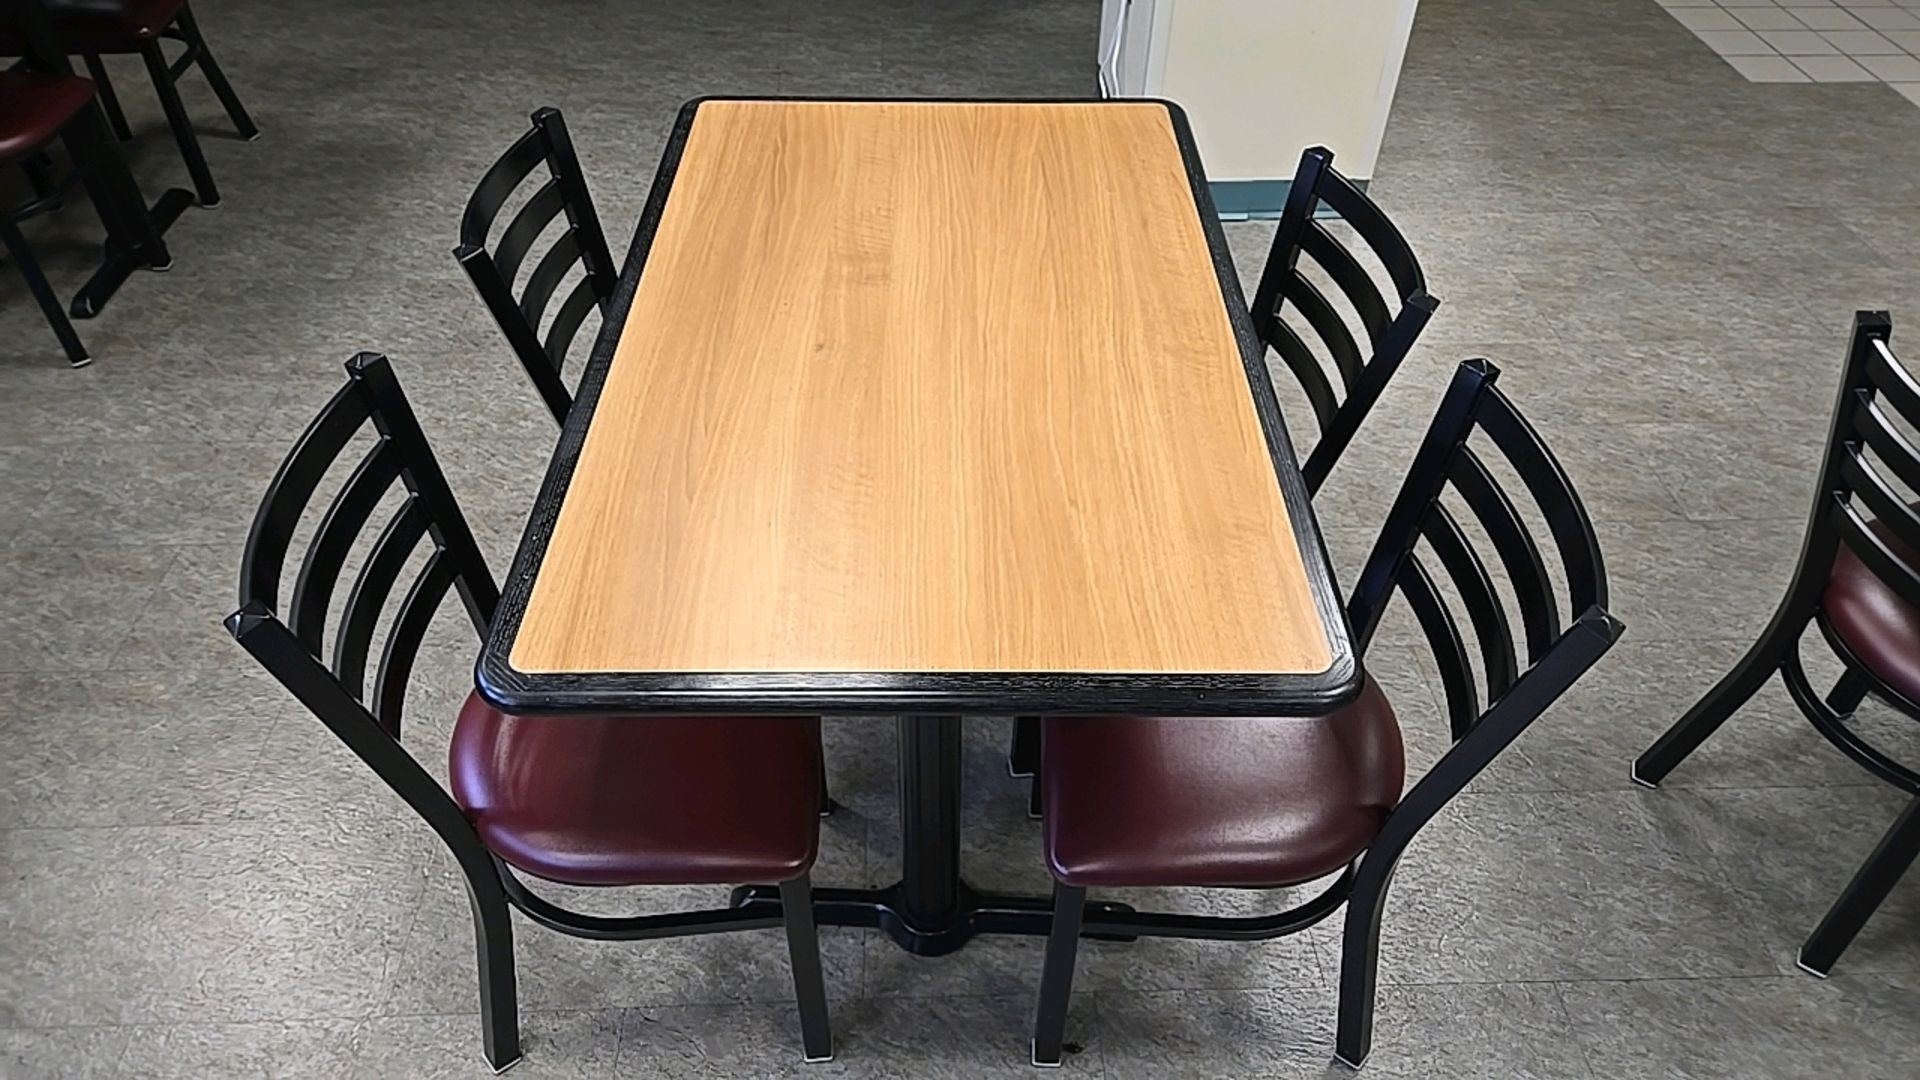 DINING TABLES, QTY (4) WITH CHAIRS, QTY (16) - Image 2 of 3